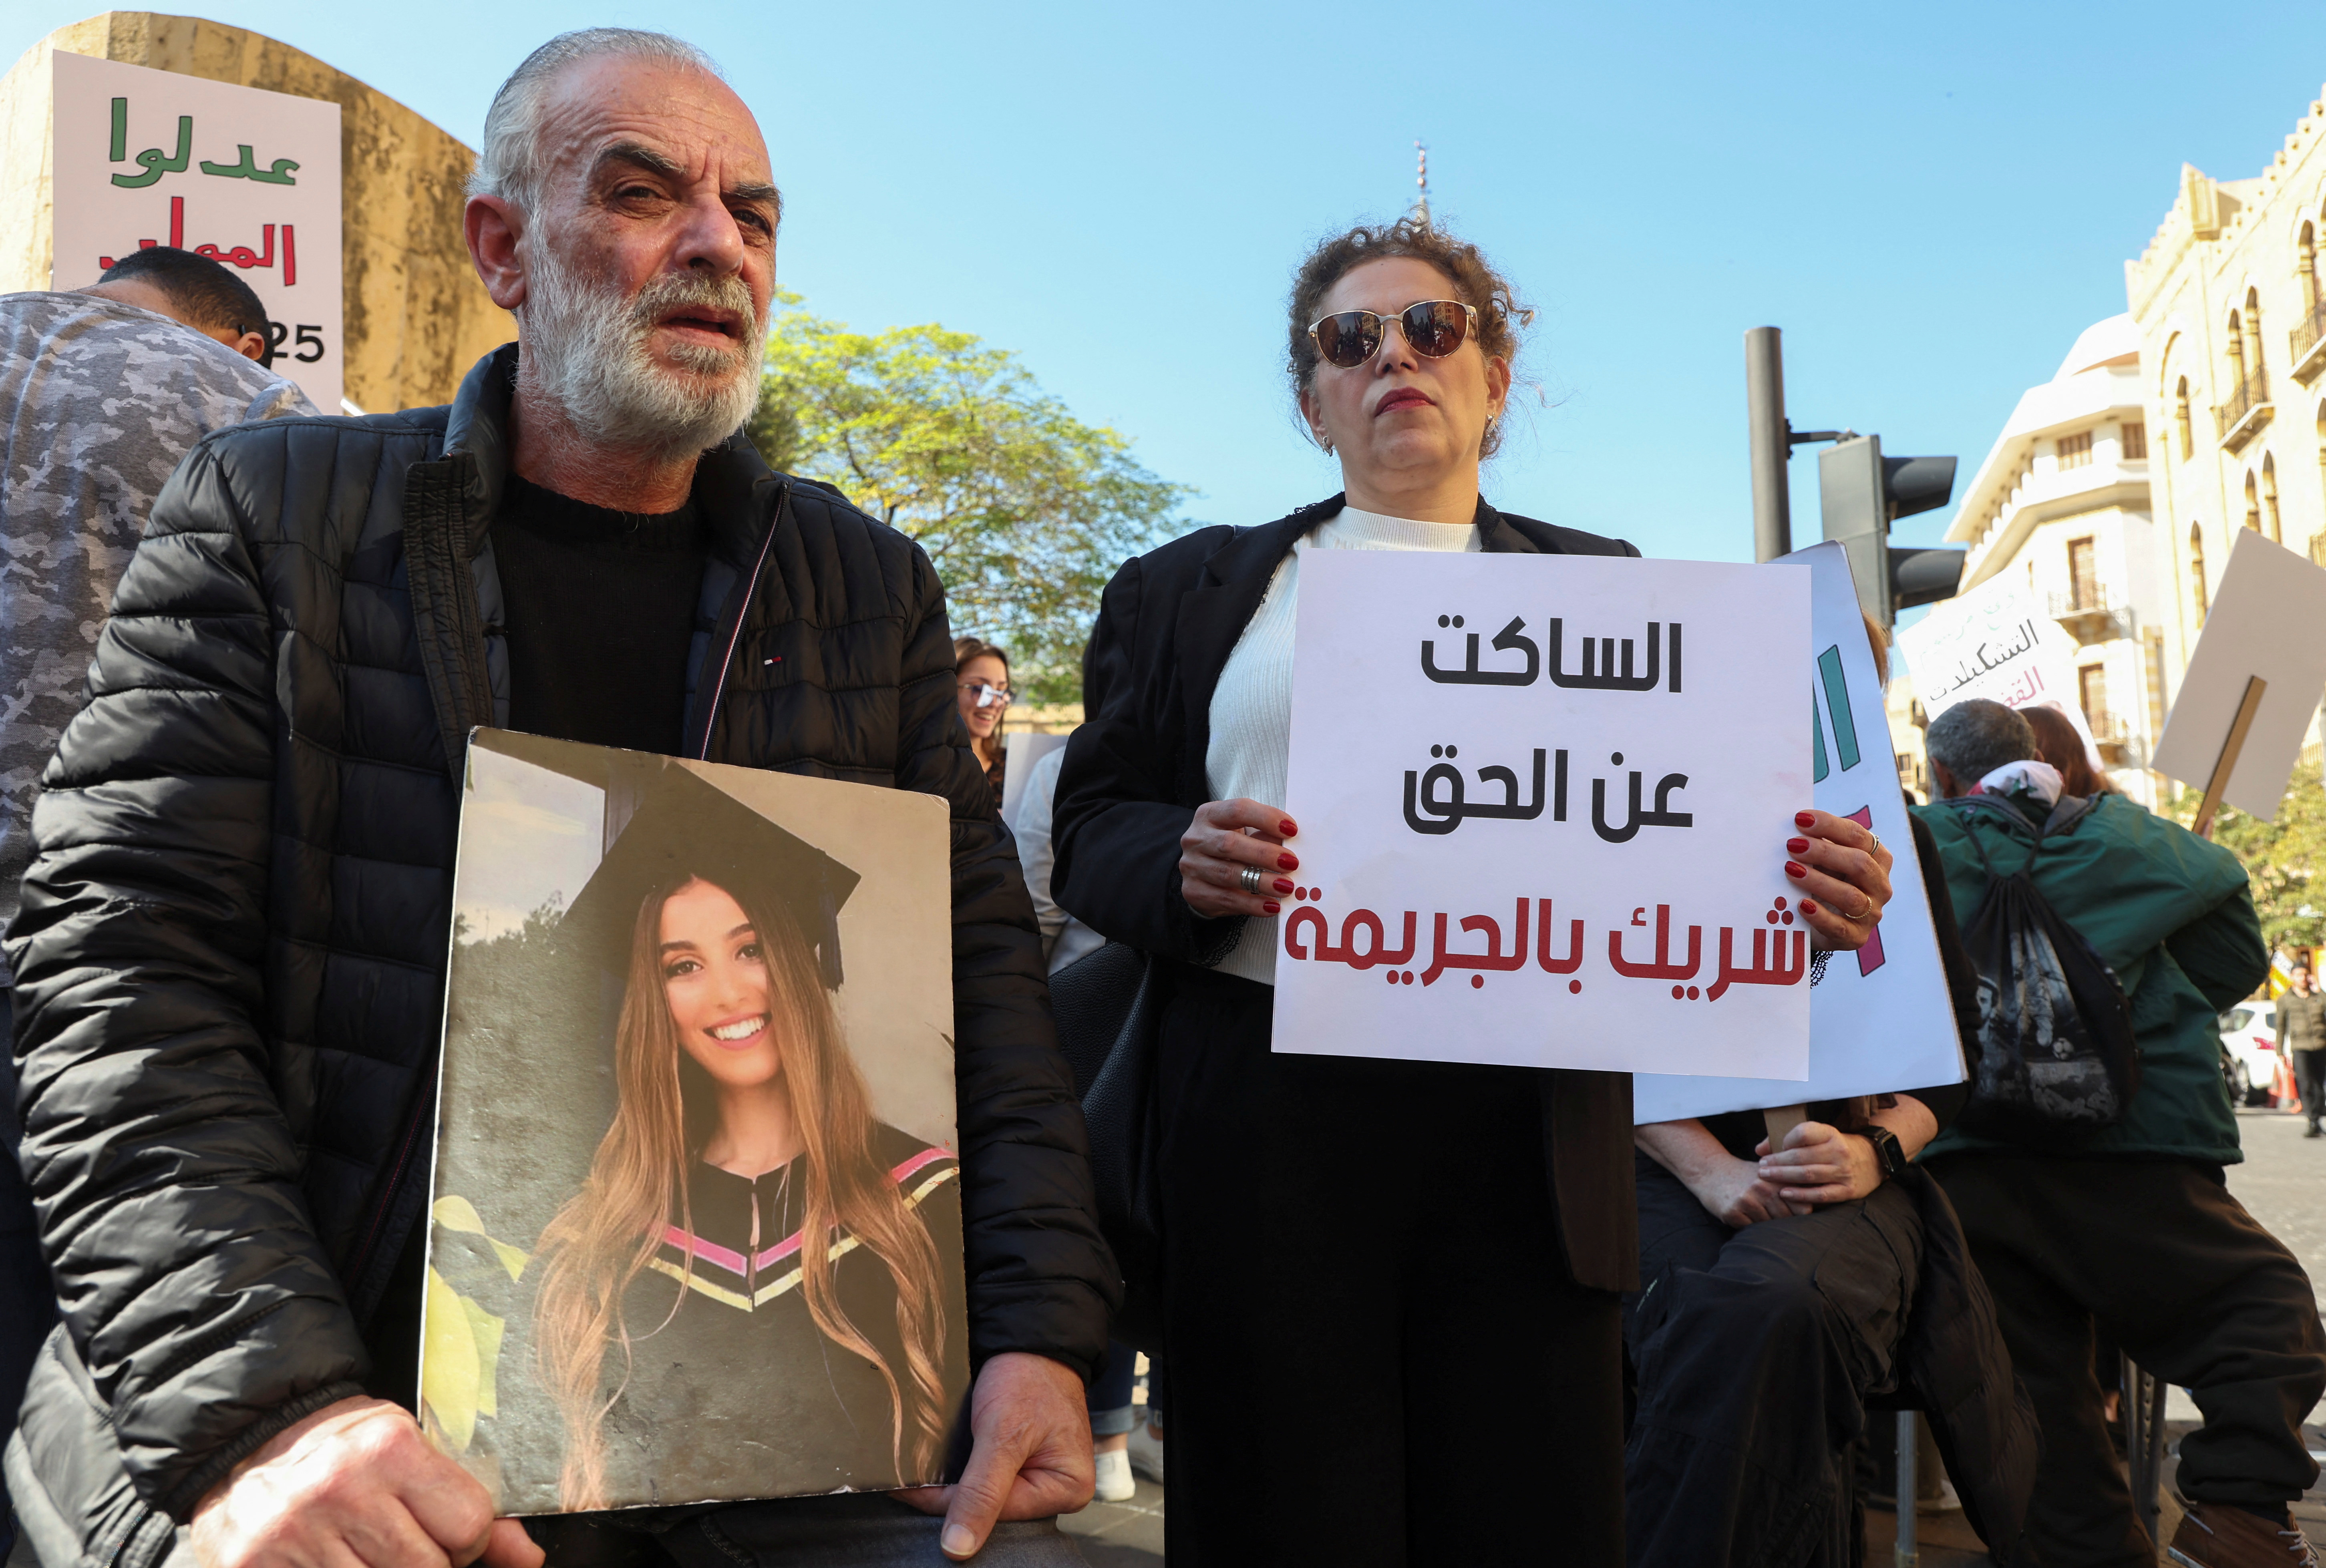 Relatives of some of the victims of the 2020 Beirut port explosion attend a protest near the parliament building in Beirut